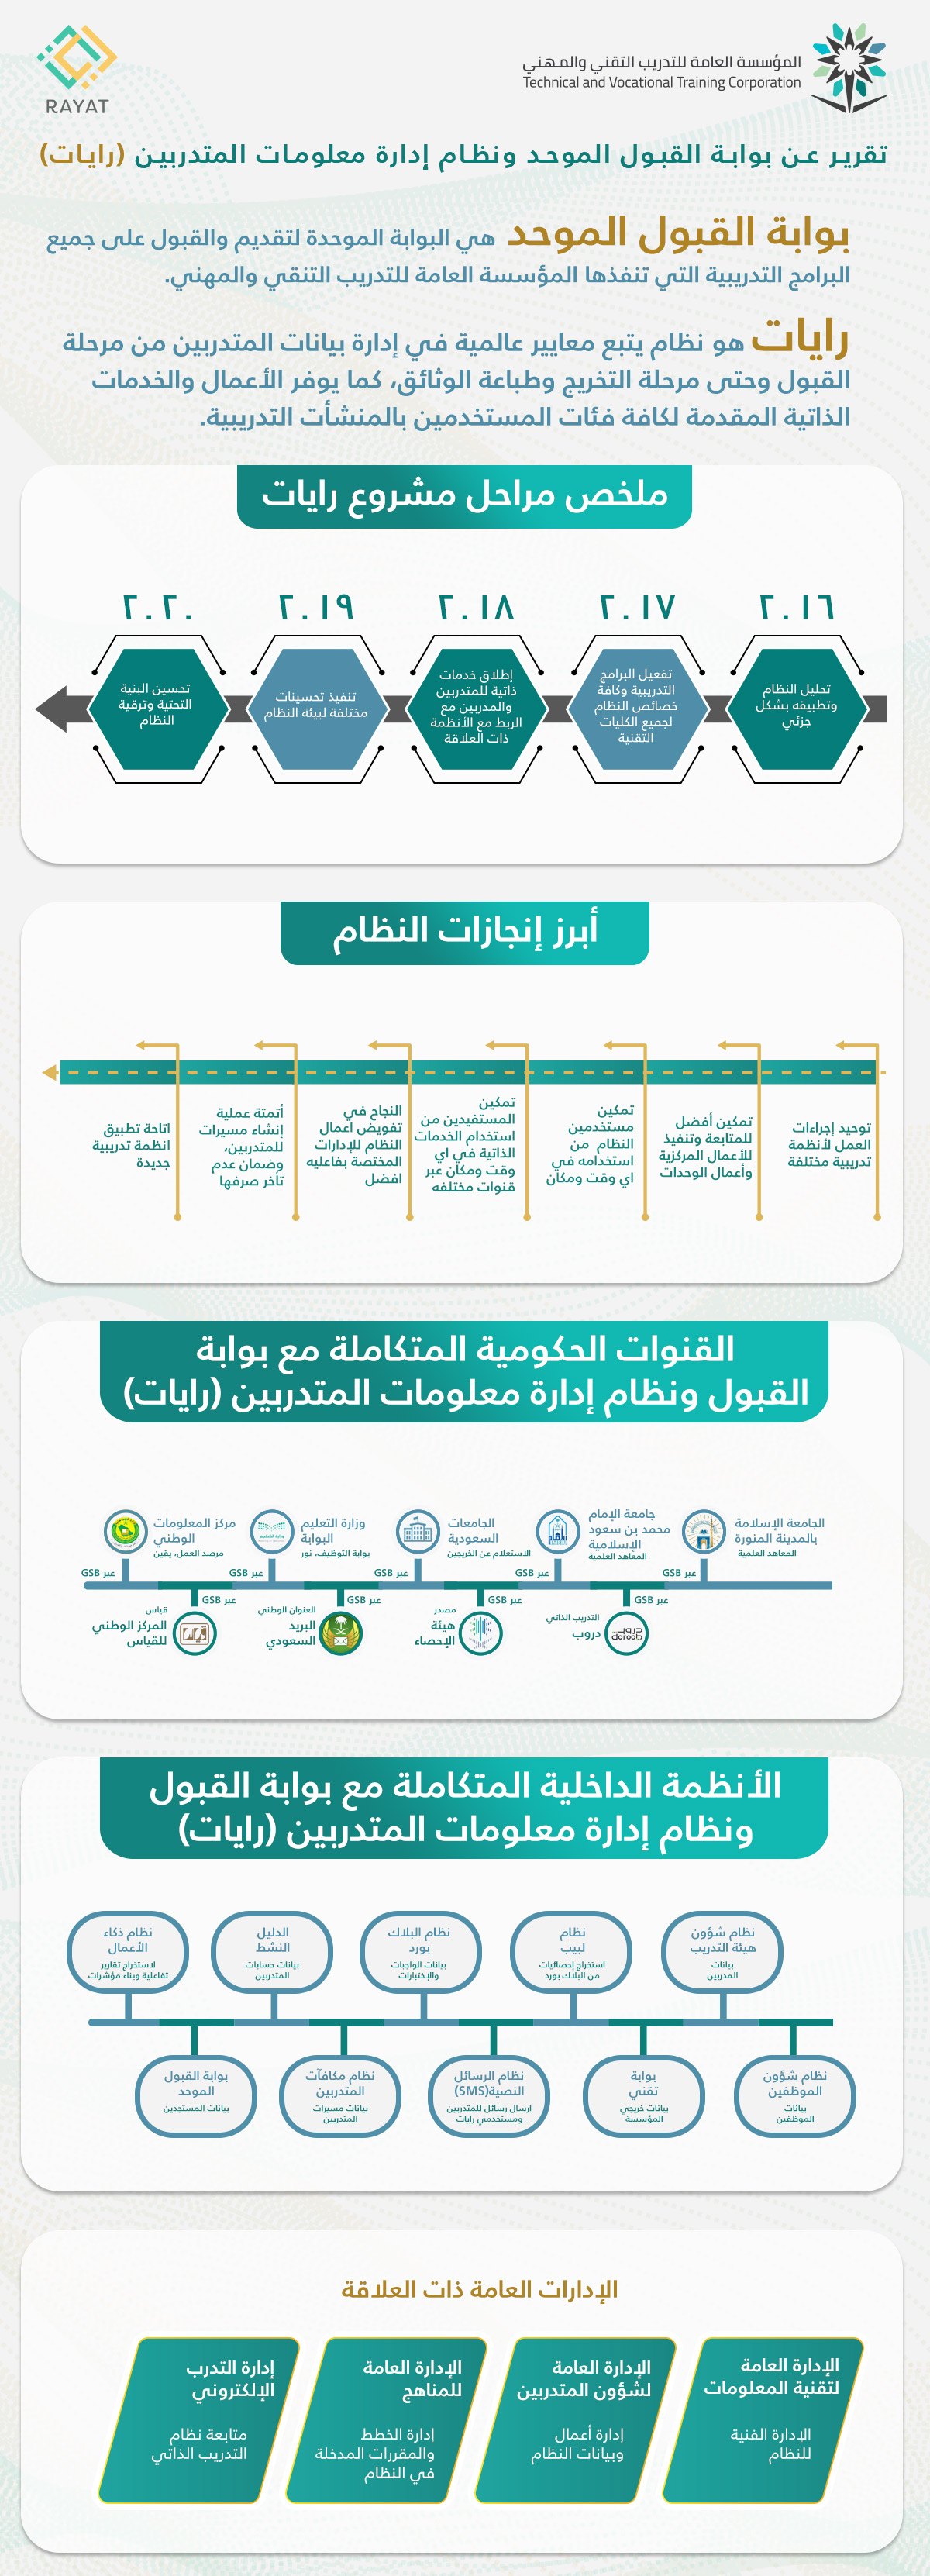 Draft achievements of the departments of electronic services 